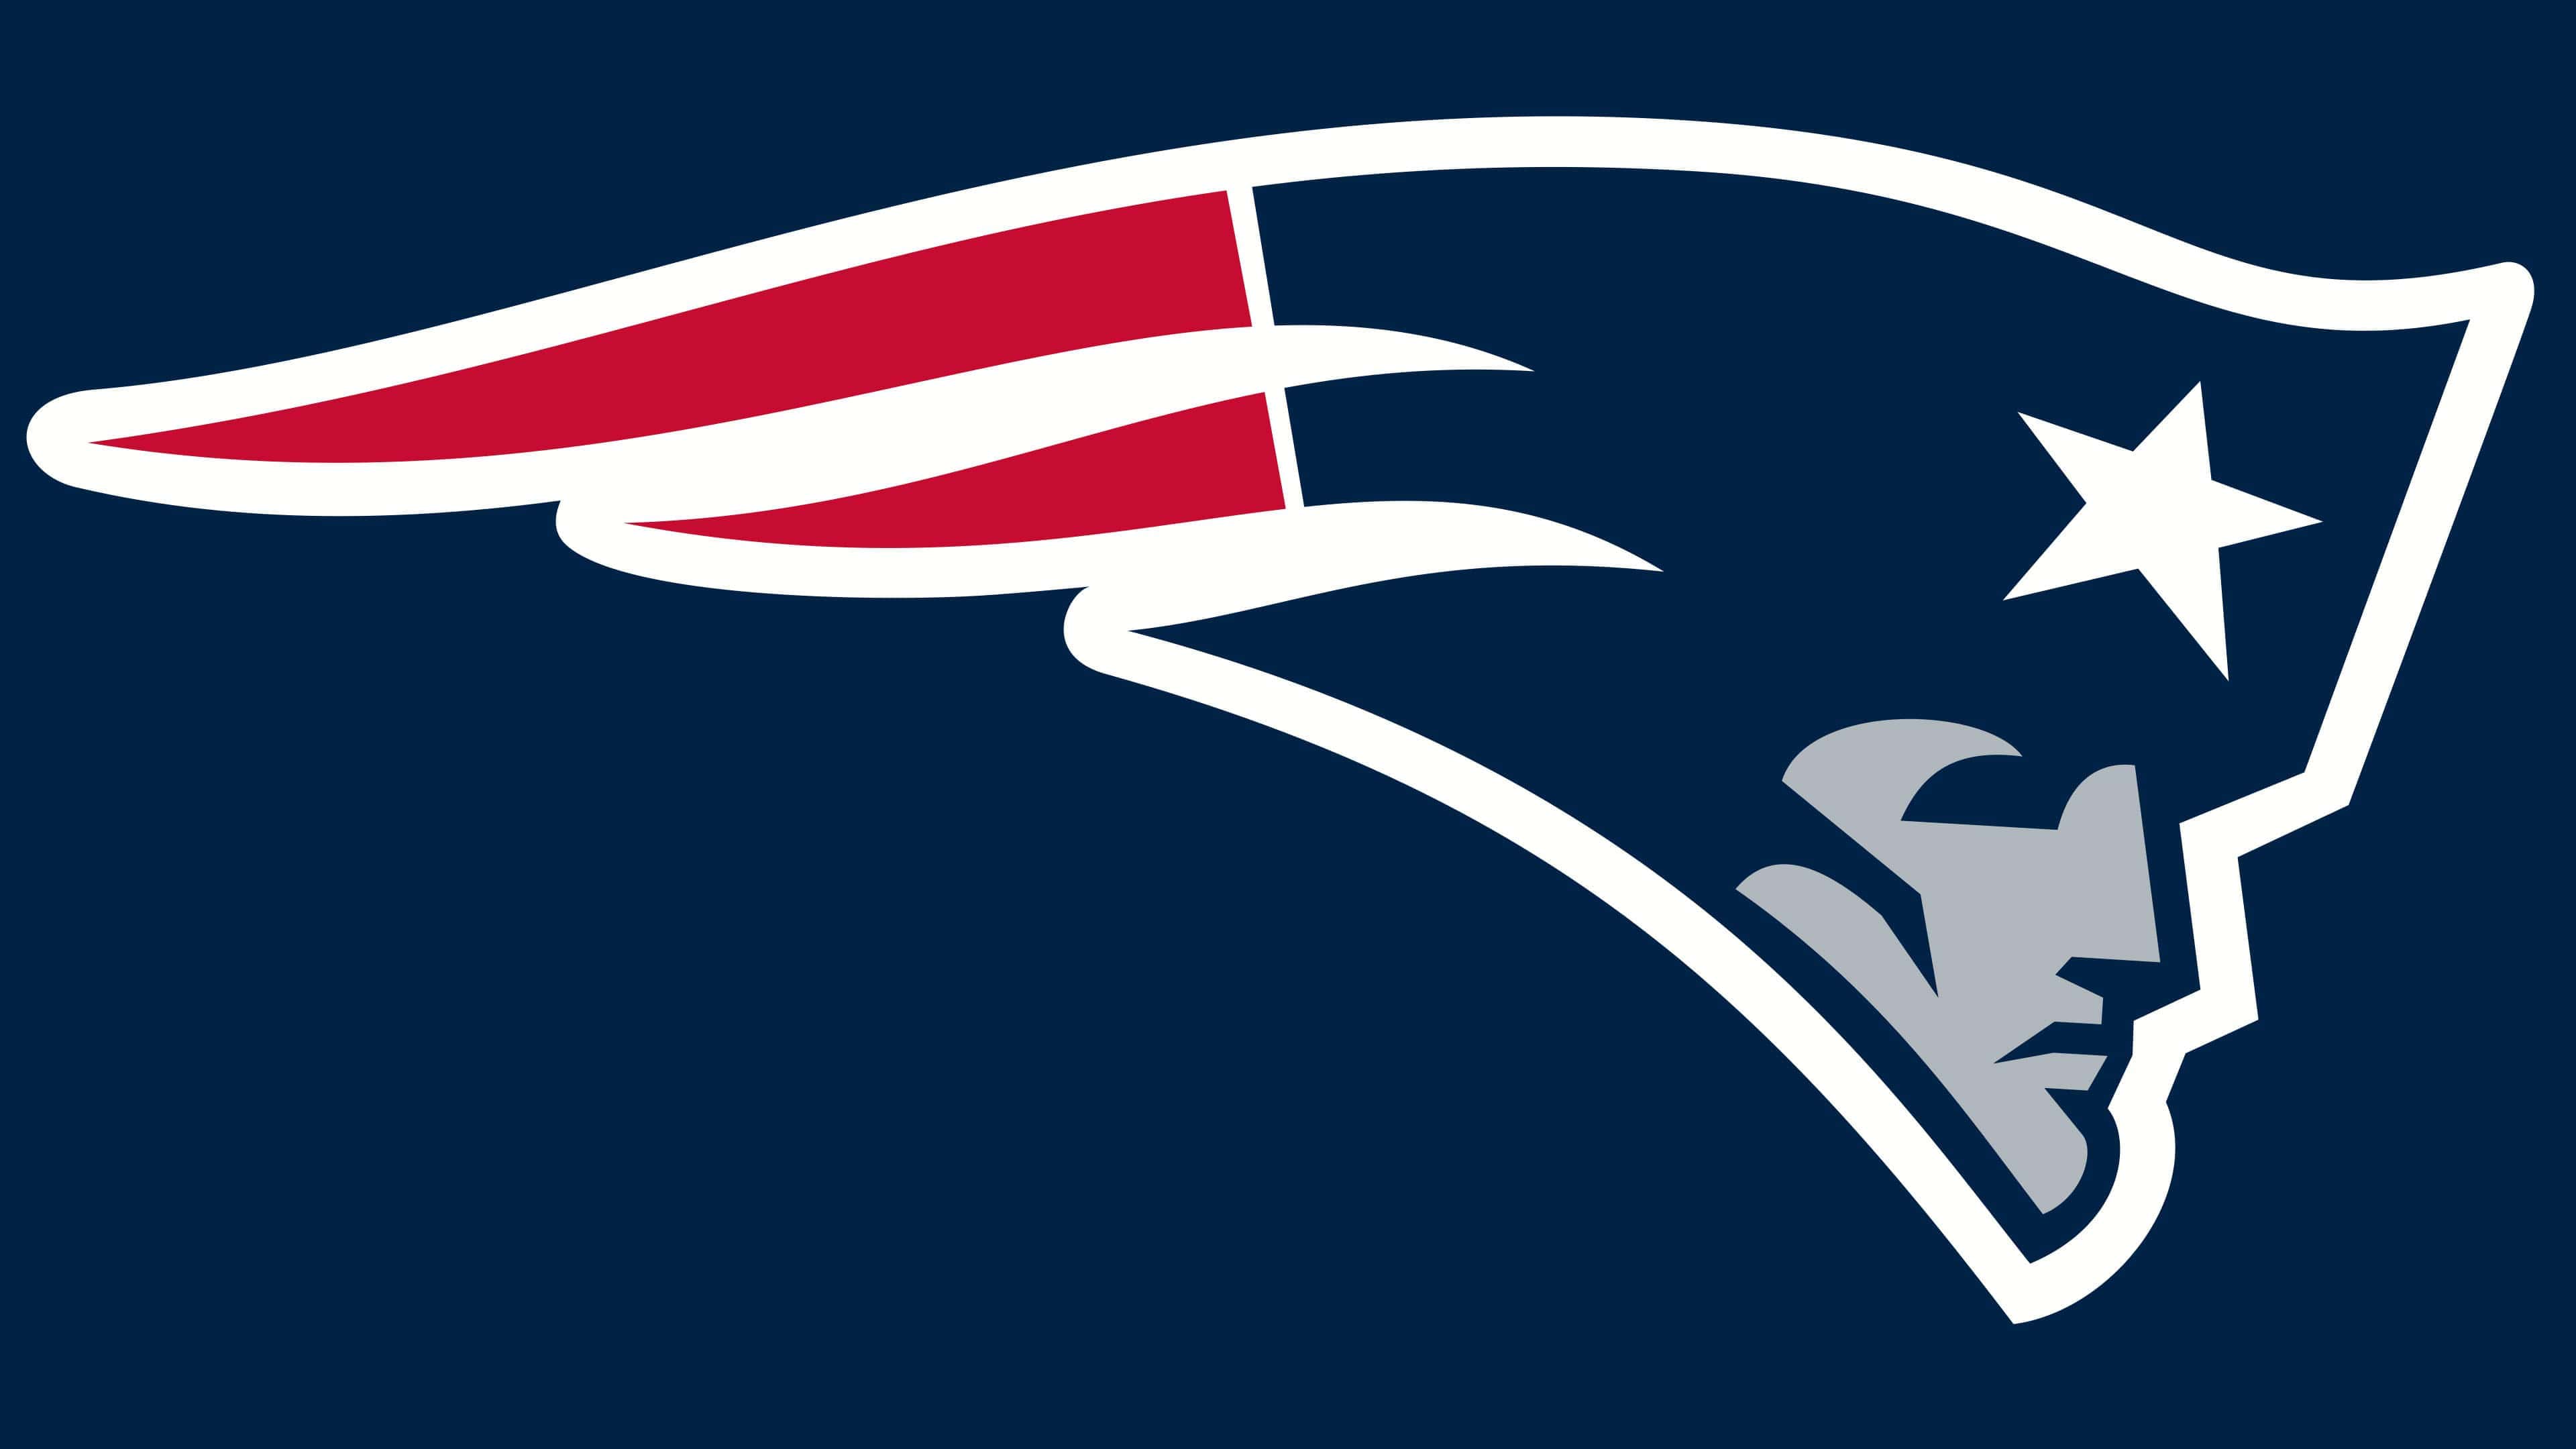 New England Patriots Logo The Most Famous Brands And Company Logos In The World